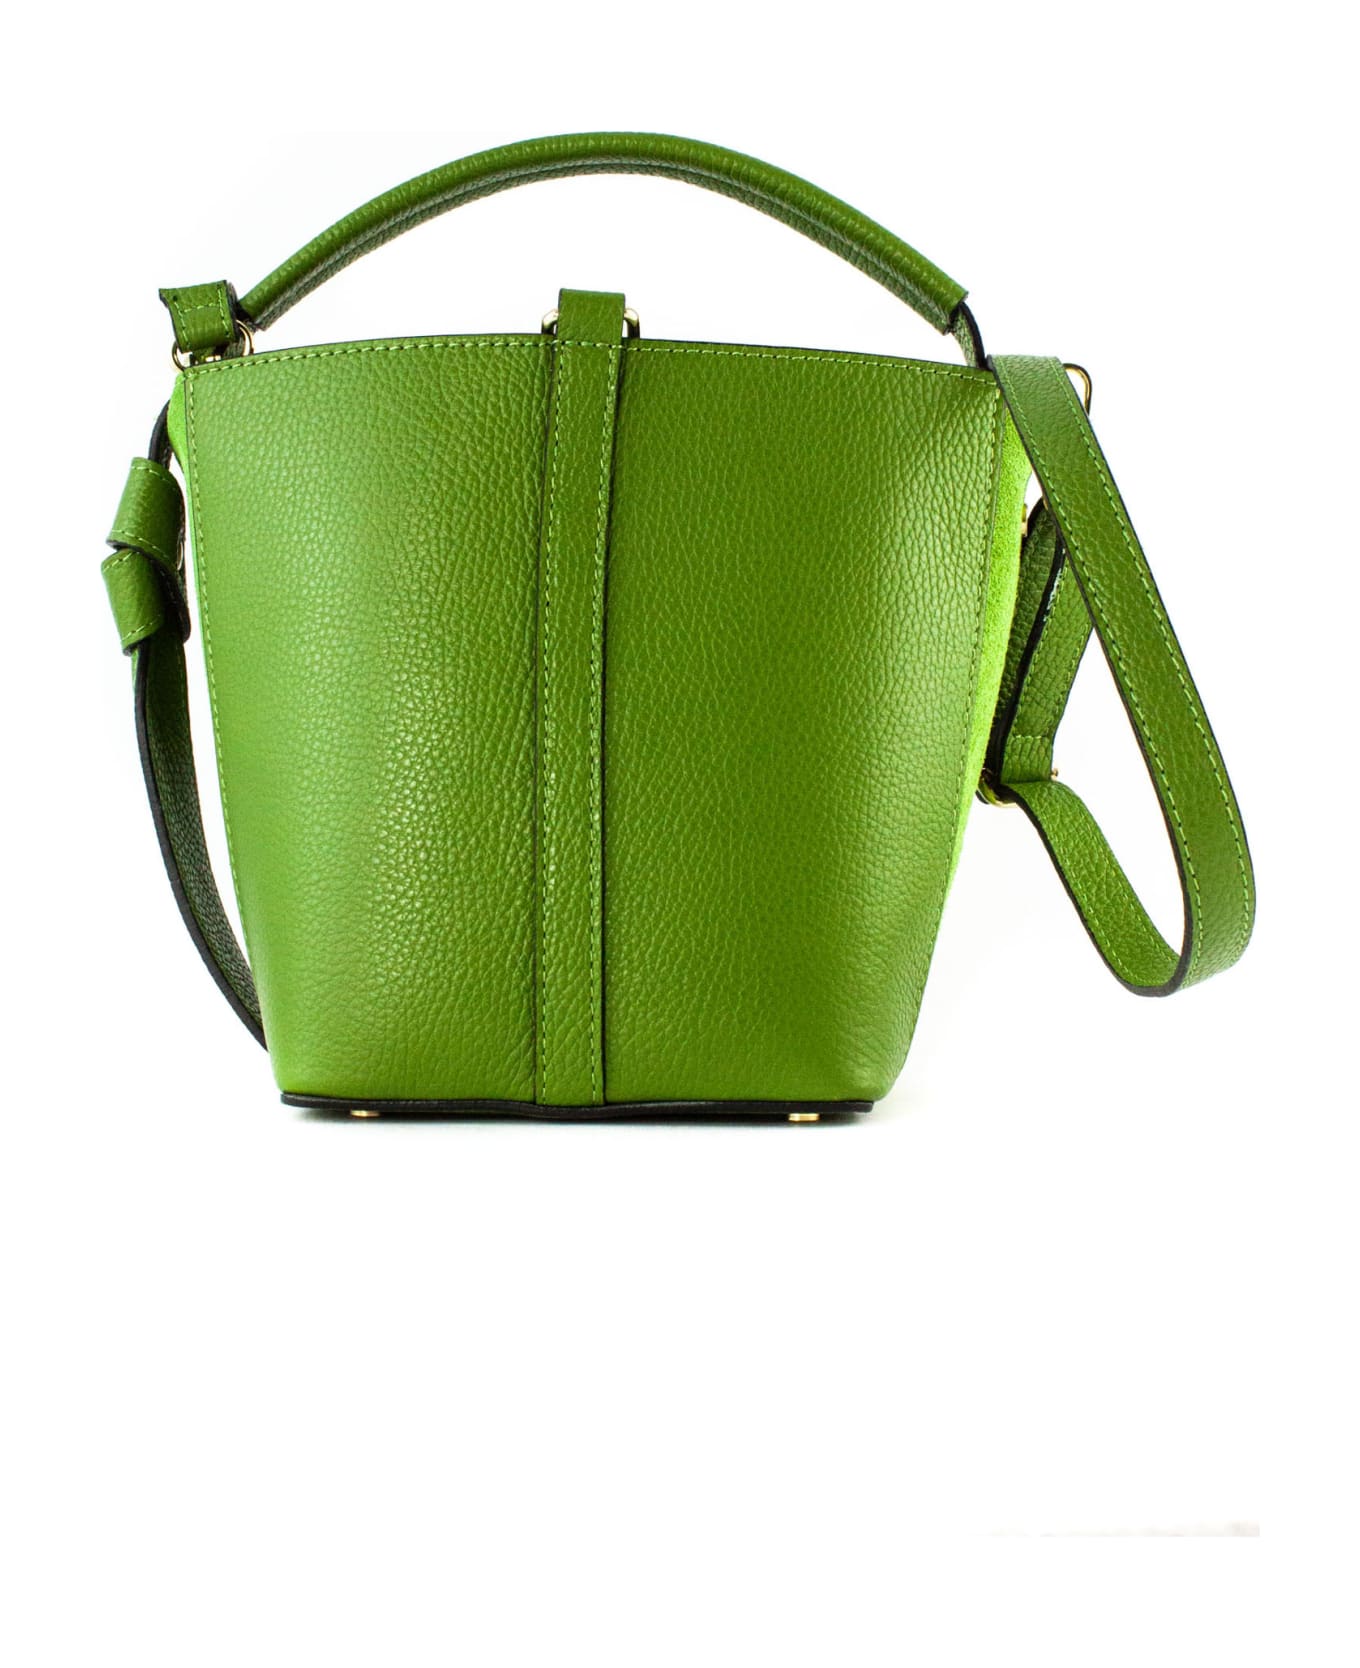 Avenue 67 Green Grained Leather Bag - Verde トートバッグ